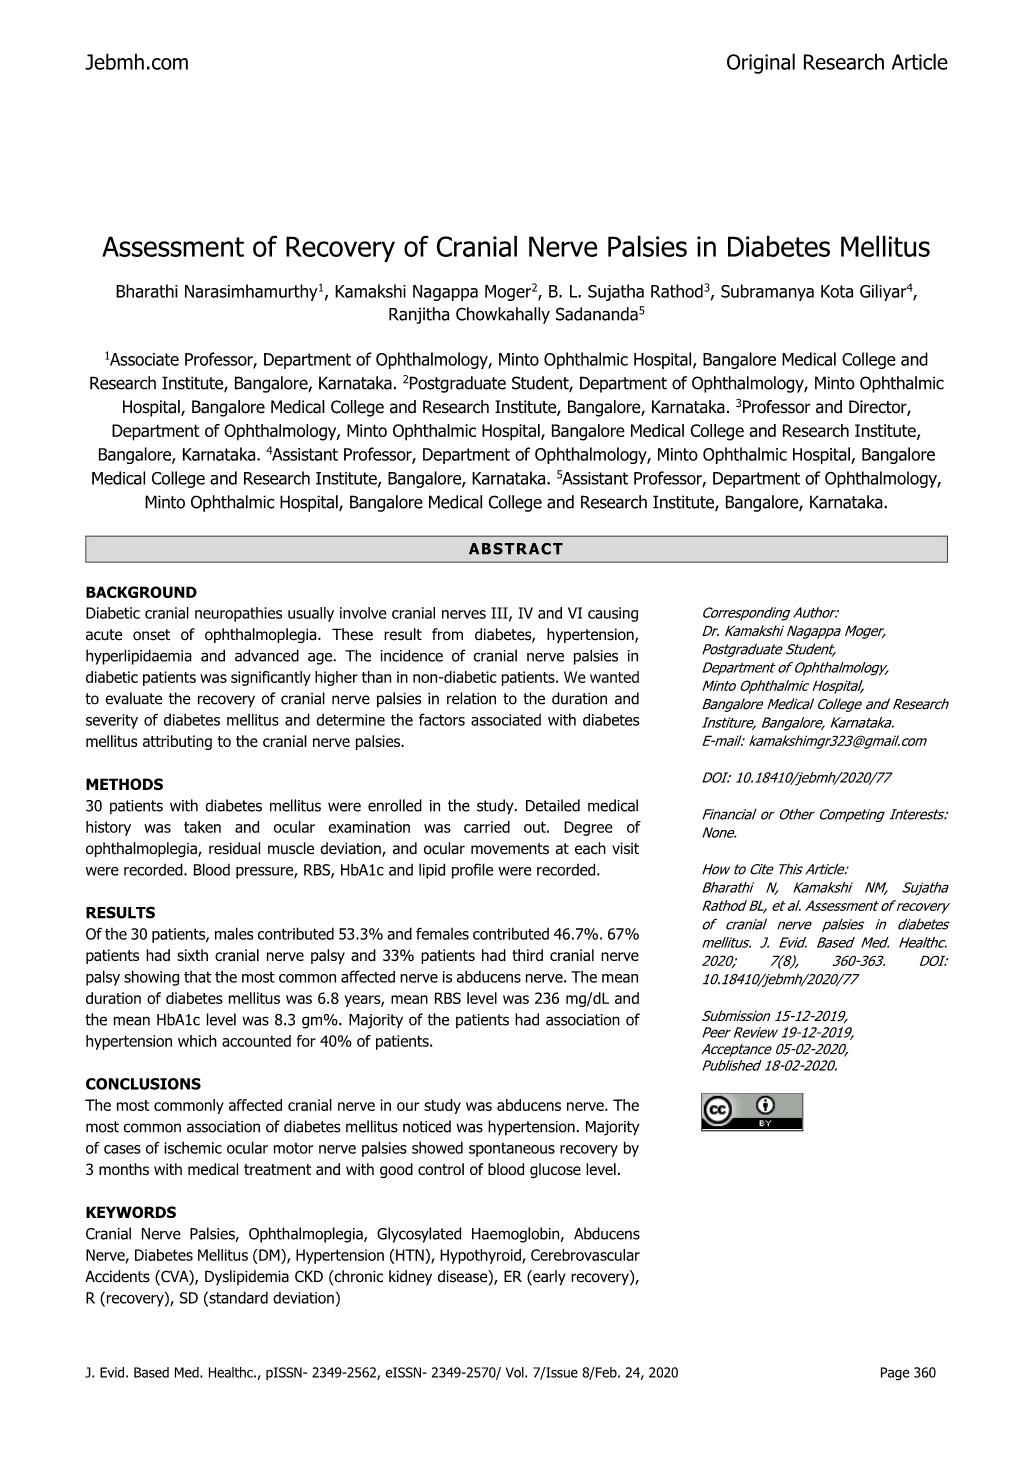 Assessment of Recovery of Cranial Nerve Palsies in Diabetes Mellitus